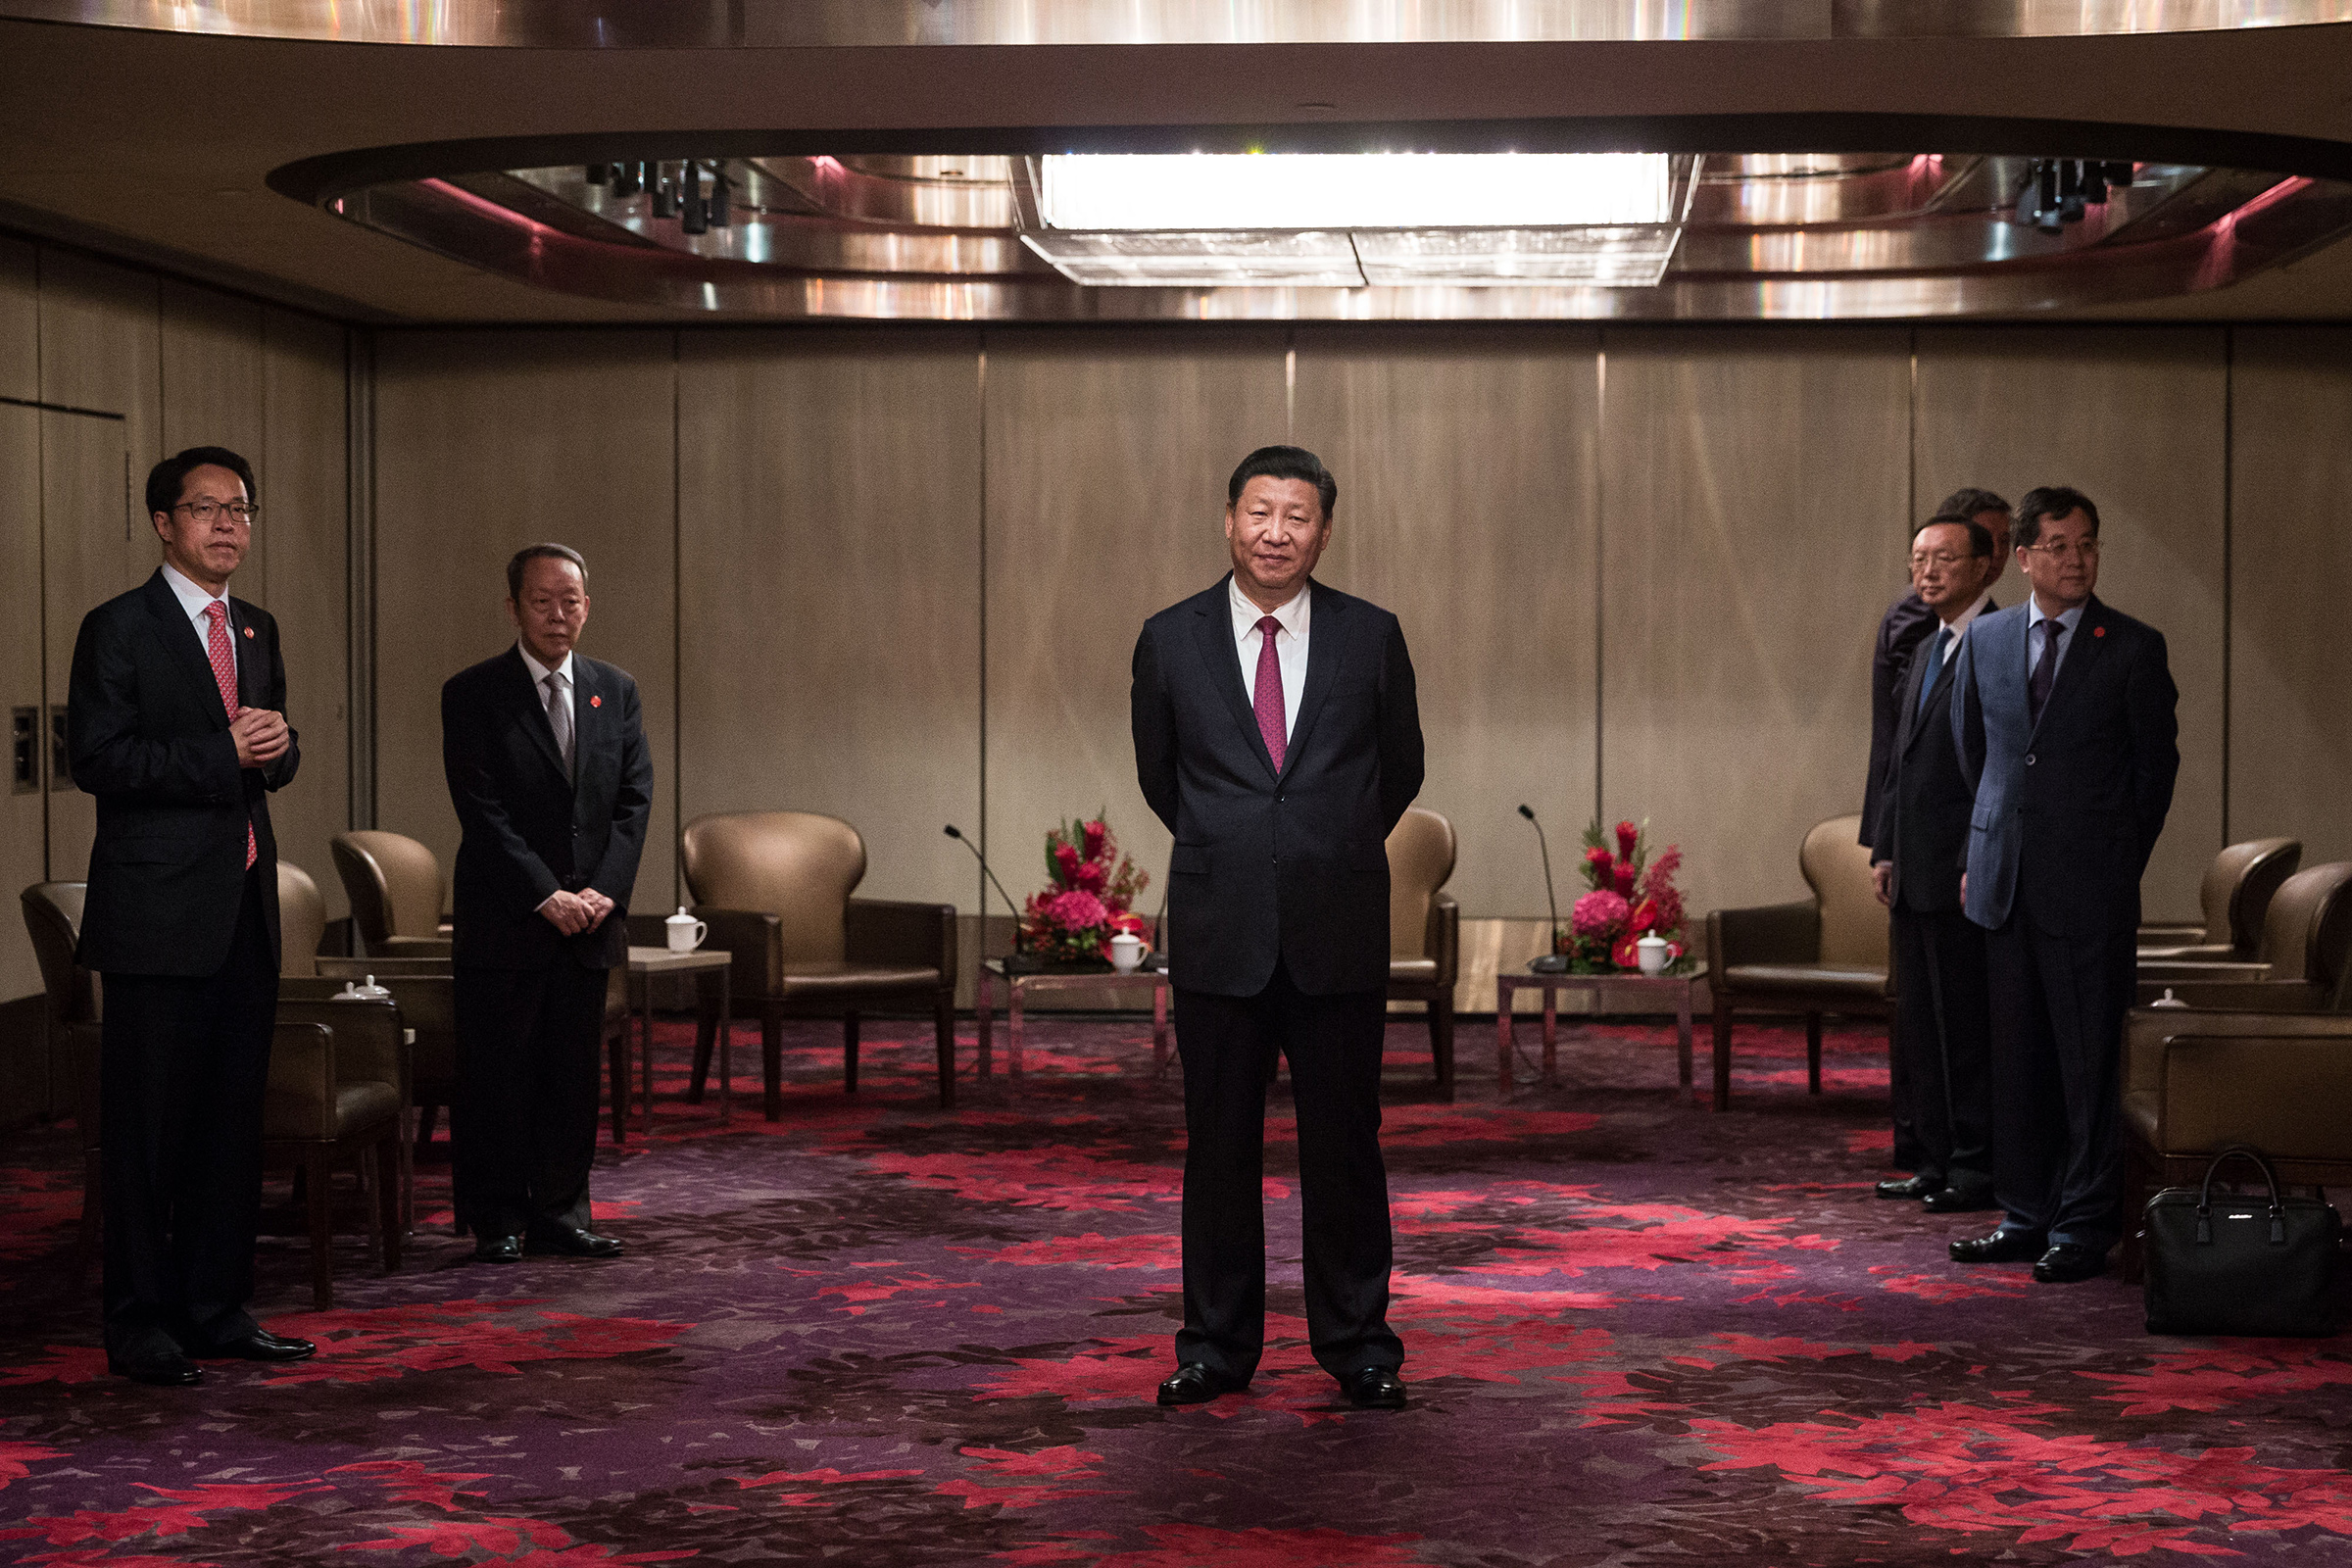 Xi in Hong Kong in 2017 ahead of inaugurating new Chief Executive Carrie Lam. (Dale de la Rey—AFP/Getty Images)